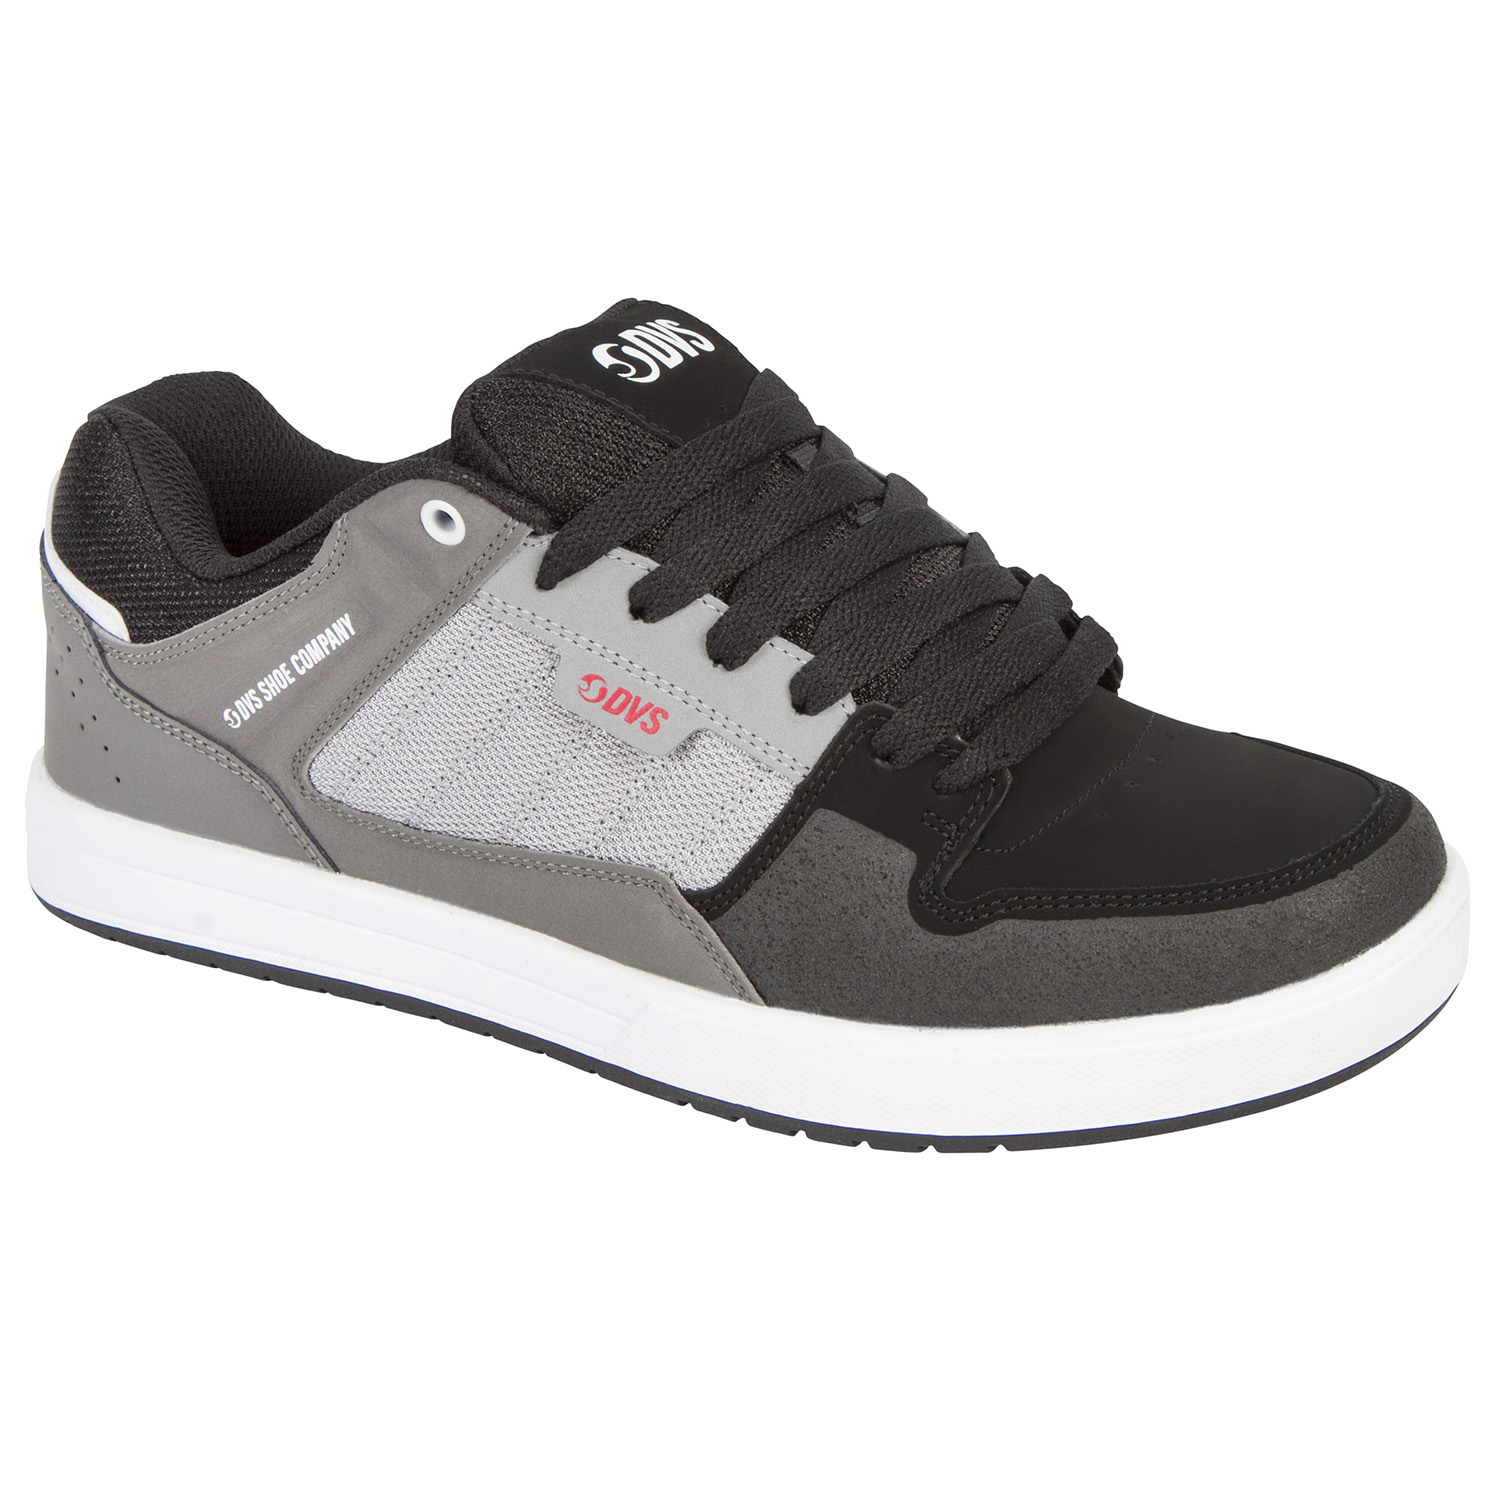 DVS Chaussures Portal Charcoal/Grey/Leather Nubuck